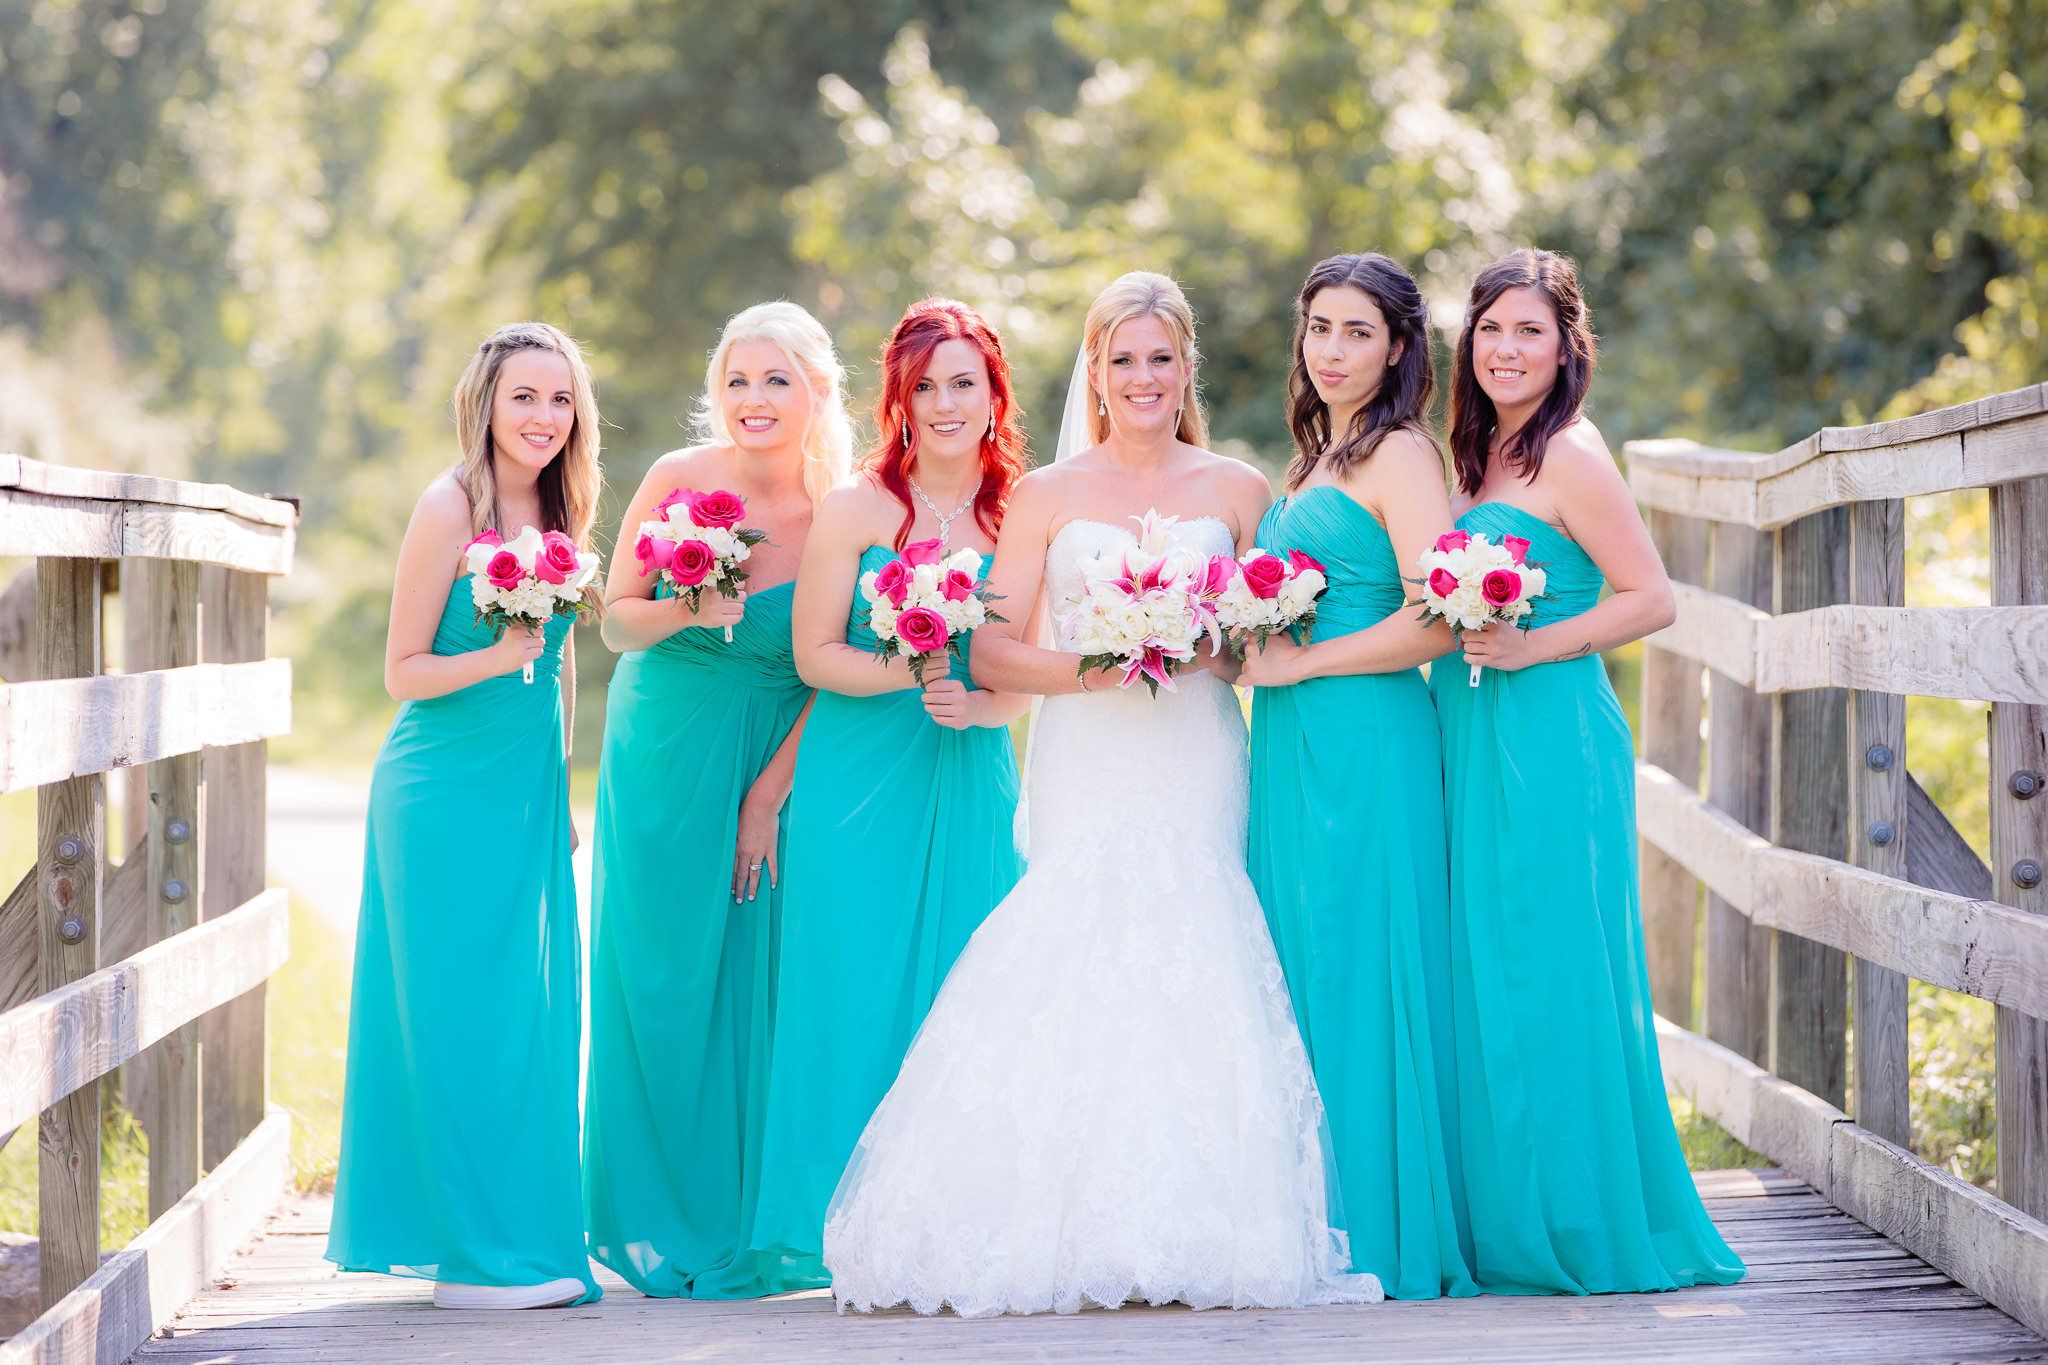 Bridesmaids in turquoise dresses and pink and white bouquets